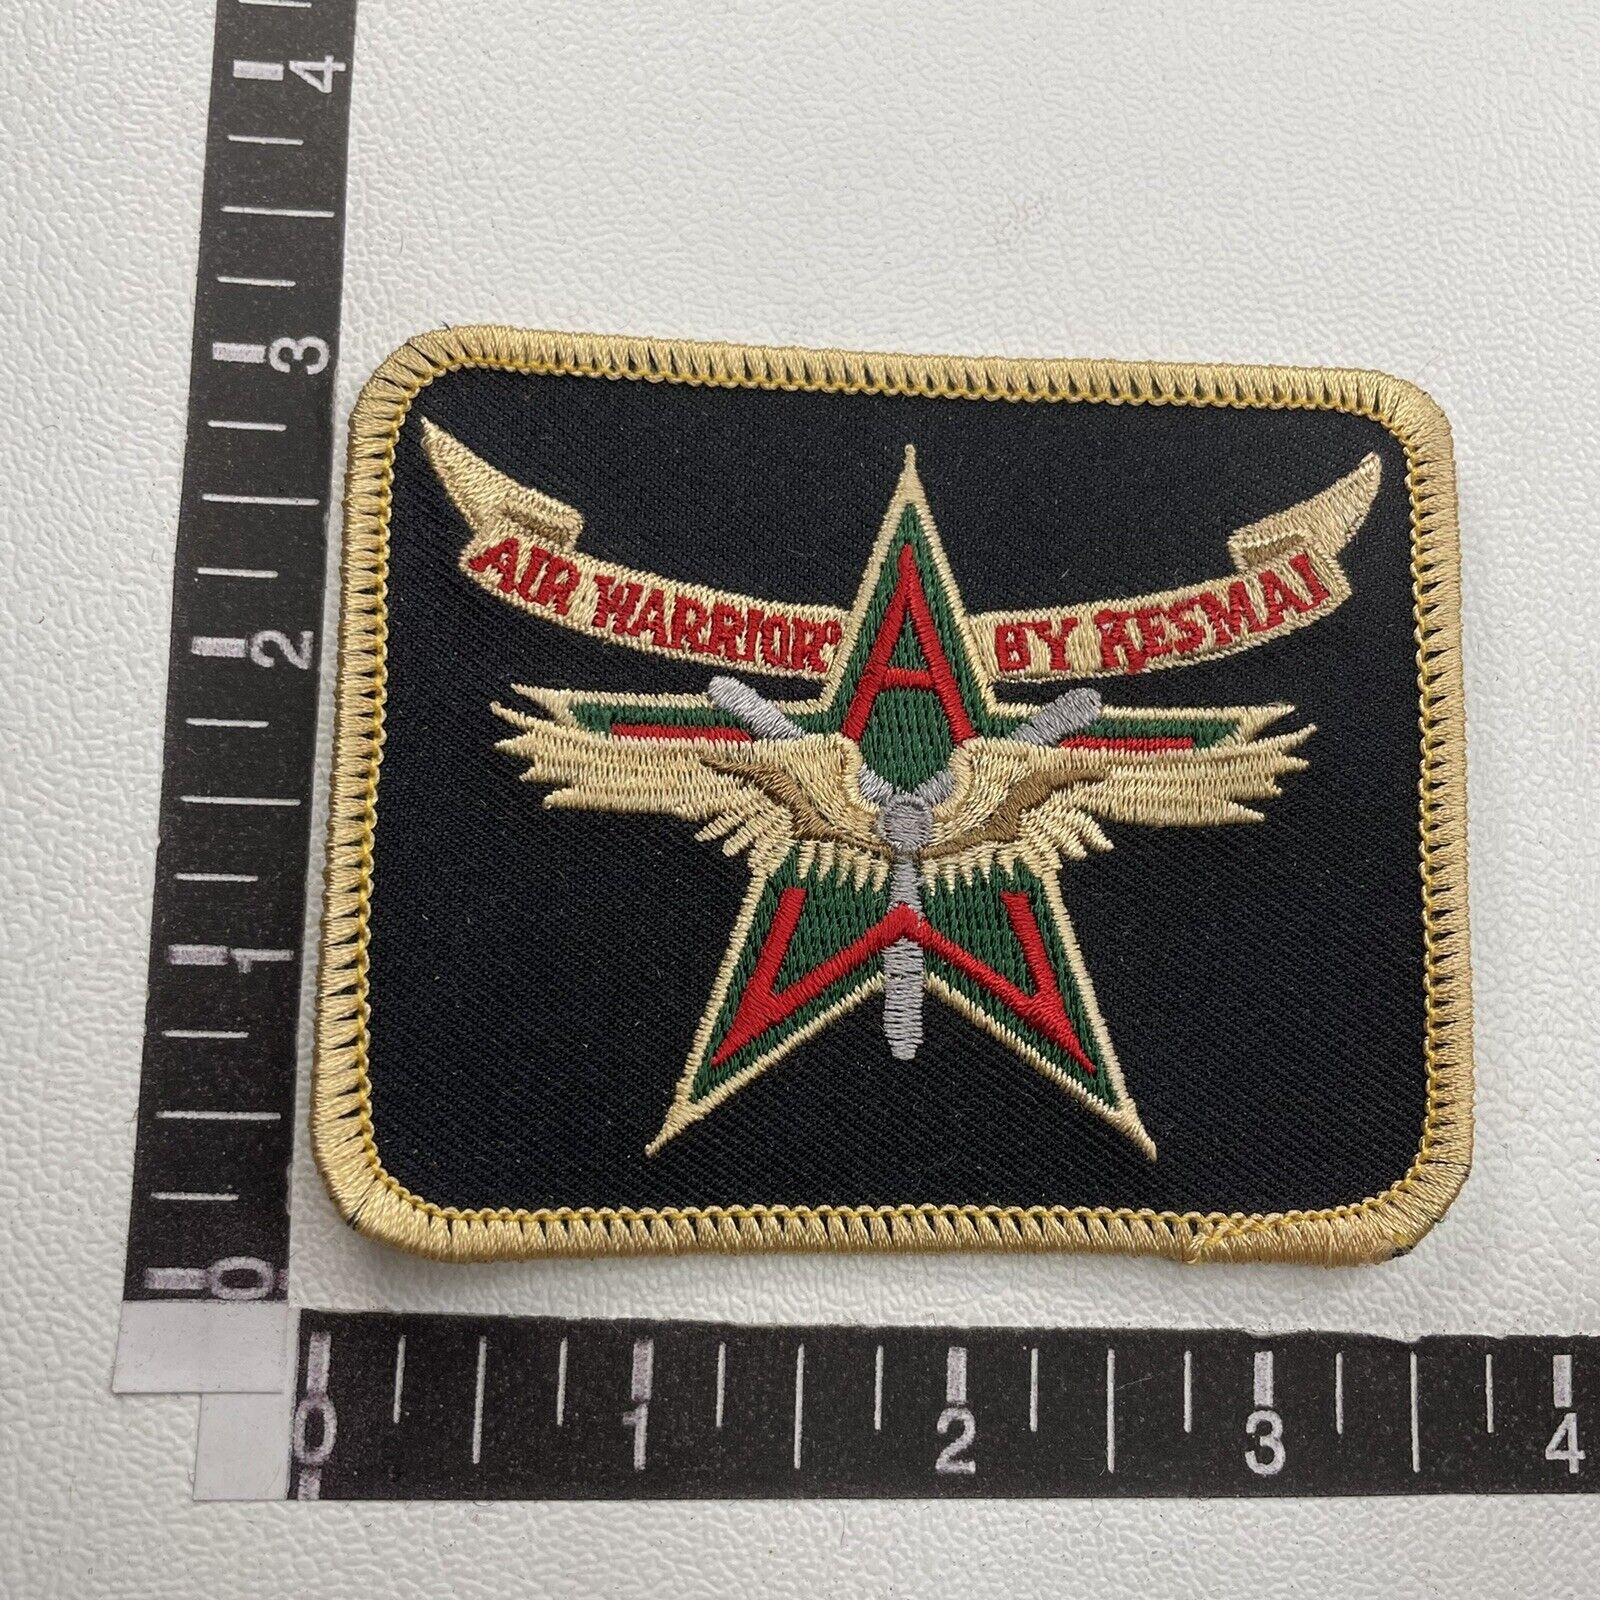 c 1990s Airplane Flight Simulation Video Game Patch AIR WARRIOR BY KESMAI 17M3